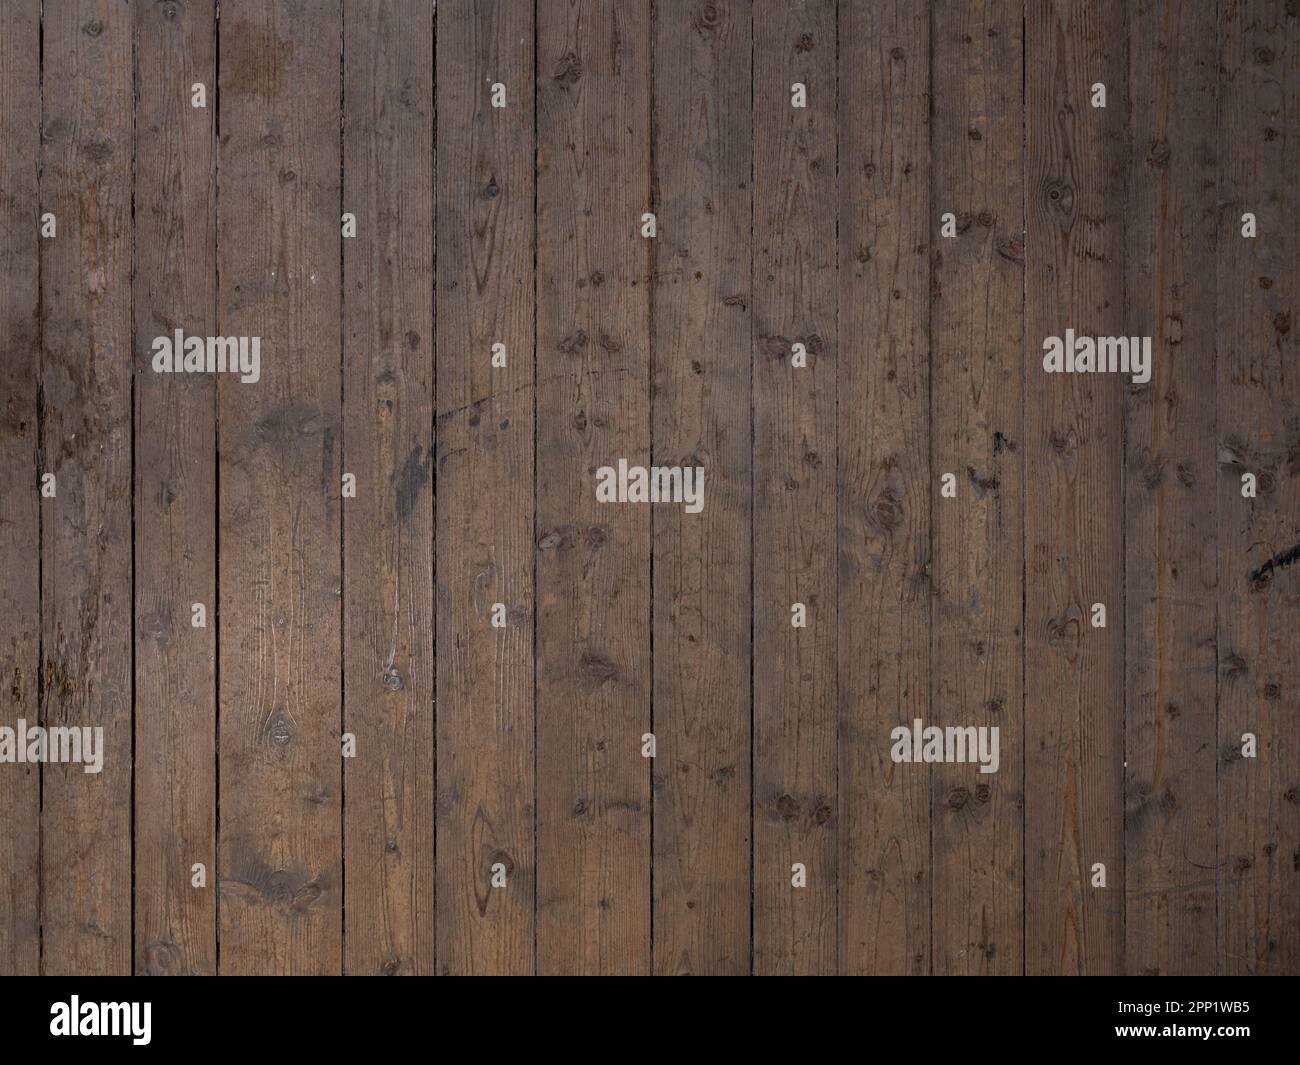 Old wooden planks flooring. Weathered floorboards in a dark brown color tone and vertical orientation. Wood grain texture background. Stock Photo